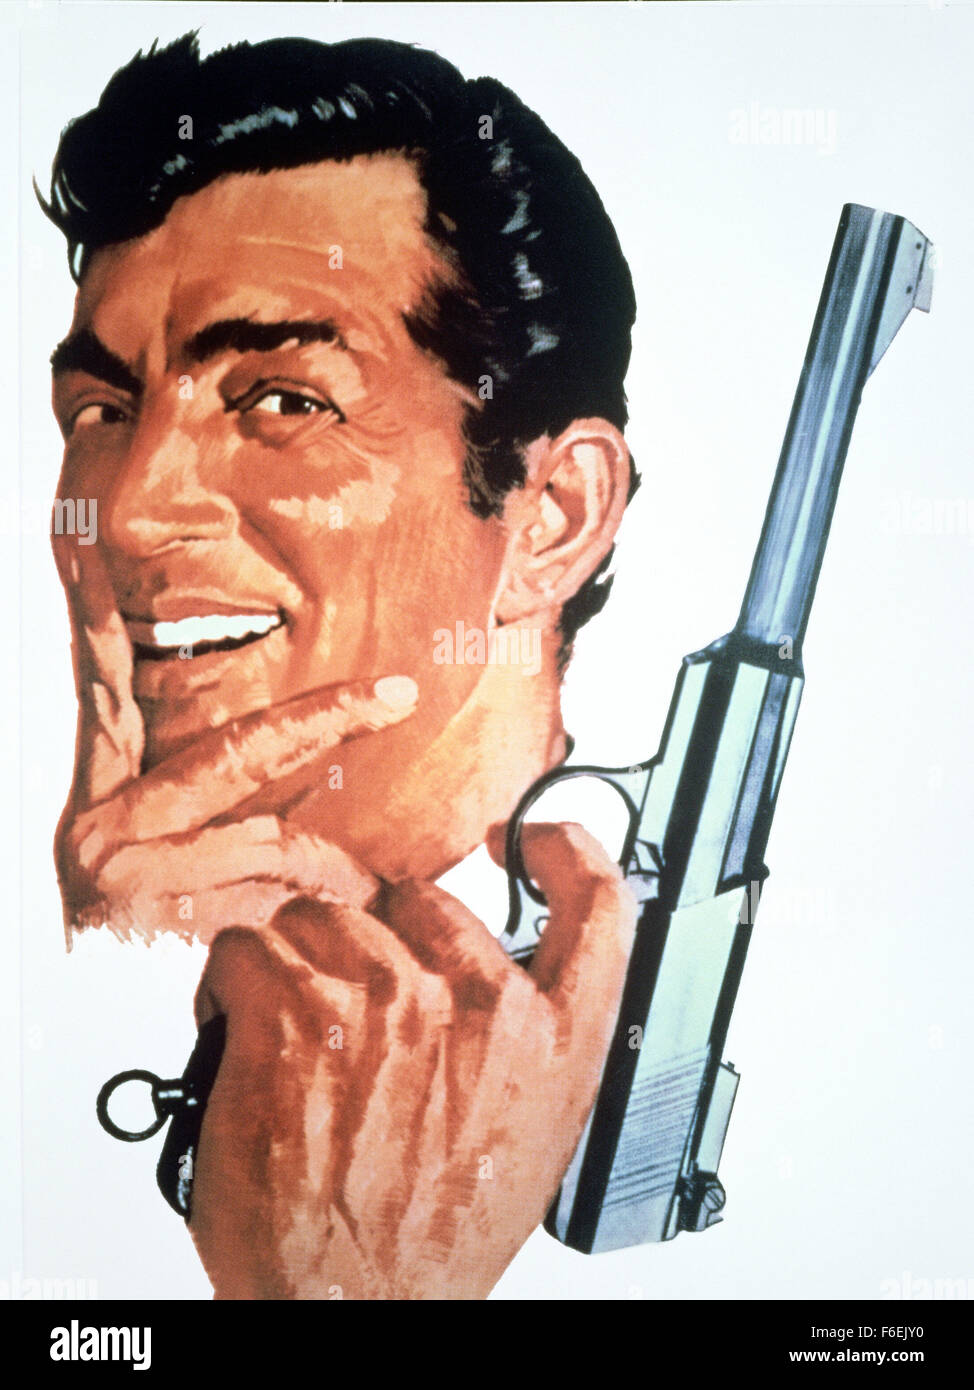 Dec 20, 1966; Monte Carlo, MONACO; Key poster art featuring DEAN MARTIN as Matt Helm in the action, adventure, drama film 'Murderers' Row' directed by Henry Levin. Stock Photo